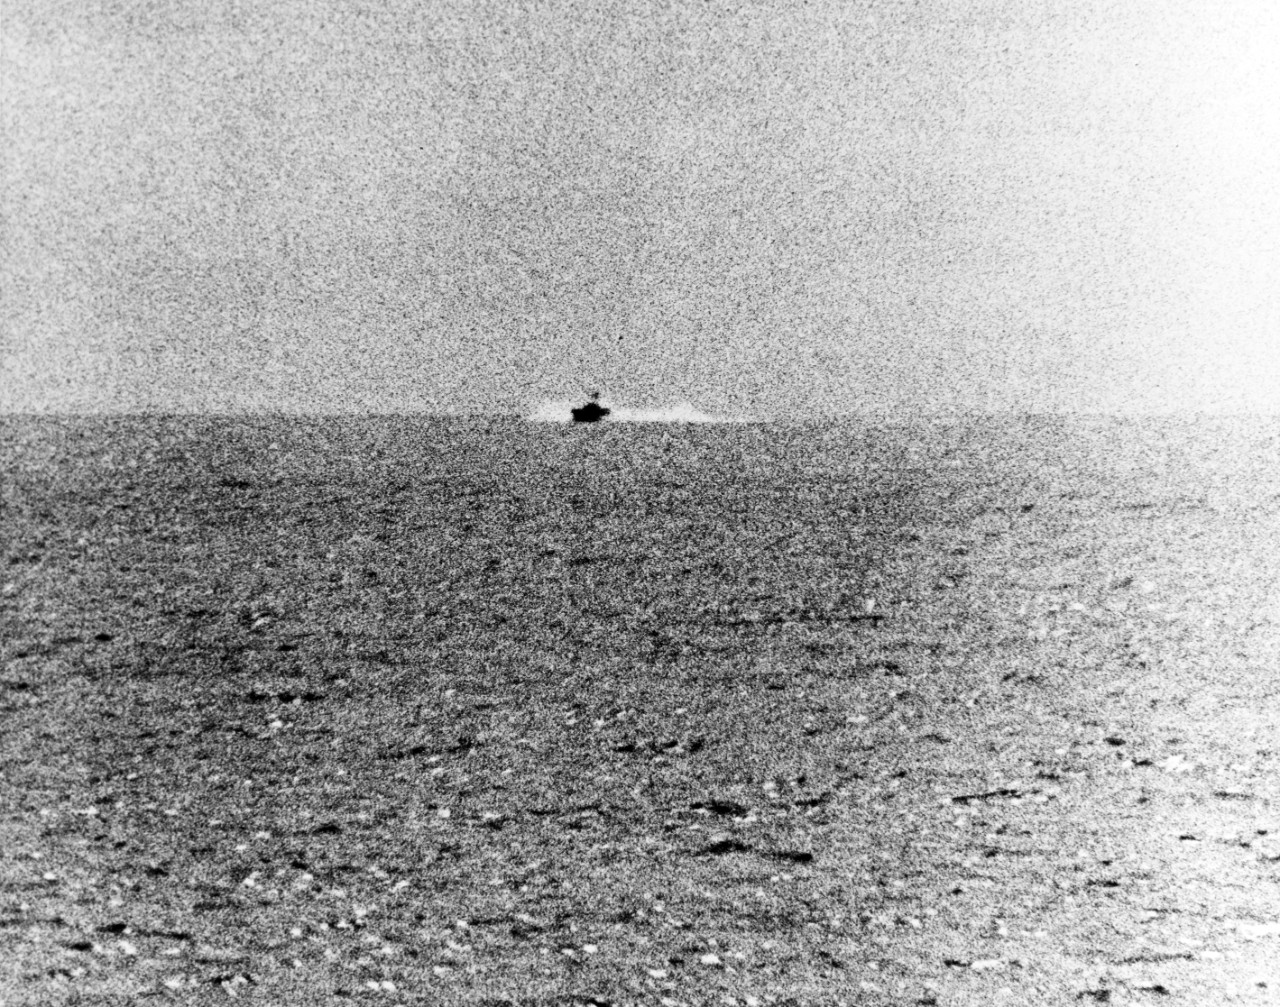 Photograph taken from USS Maddox (DD-731) during her engagement with three North Vietnamese motor torpedo boats in the Gulf of Tonkin, 2 August 1964. The view shows one of the boats speeding towards the Maddox. Official U.S. Navy Photograph.